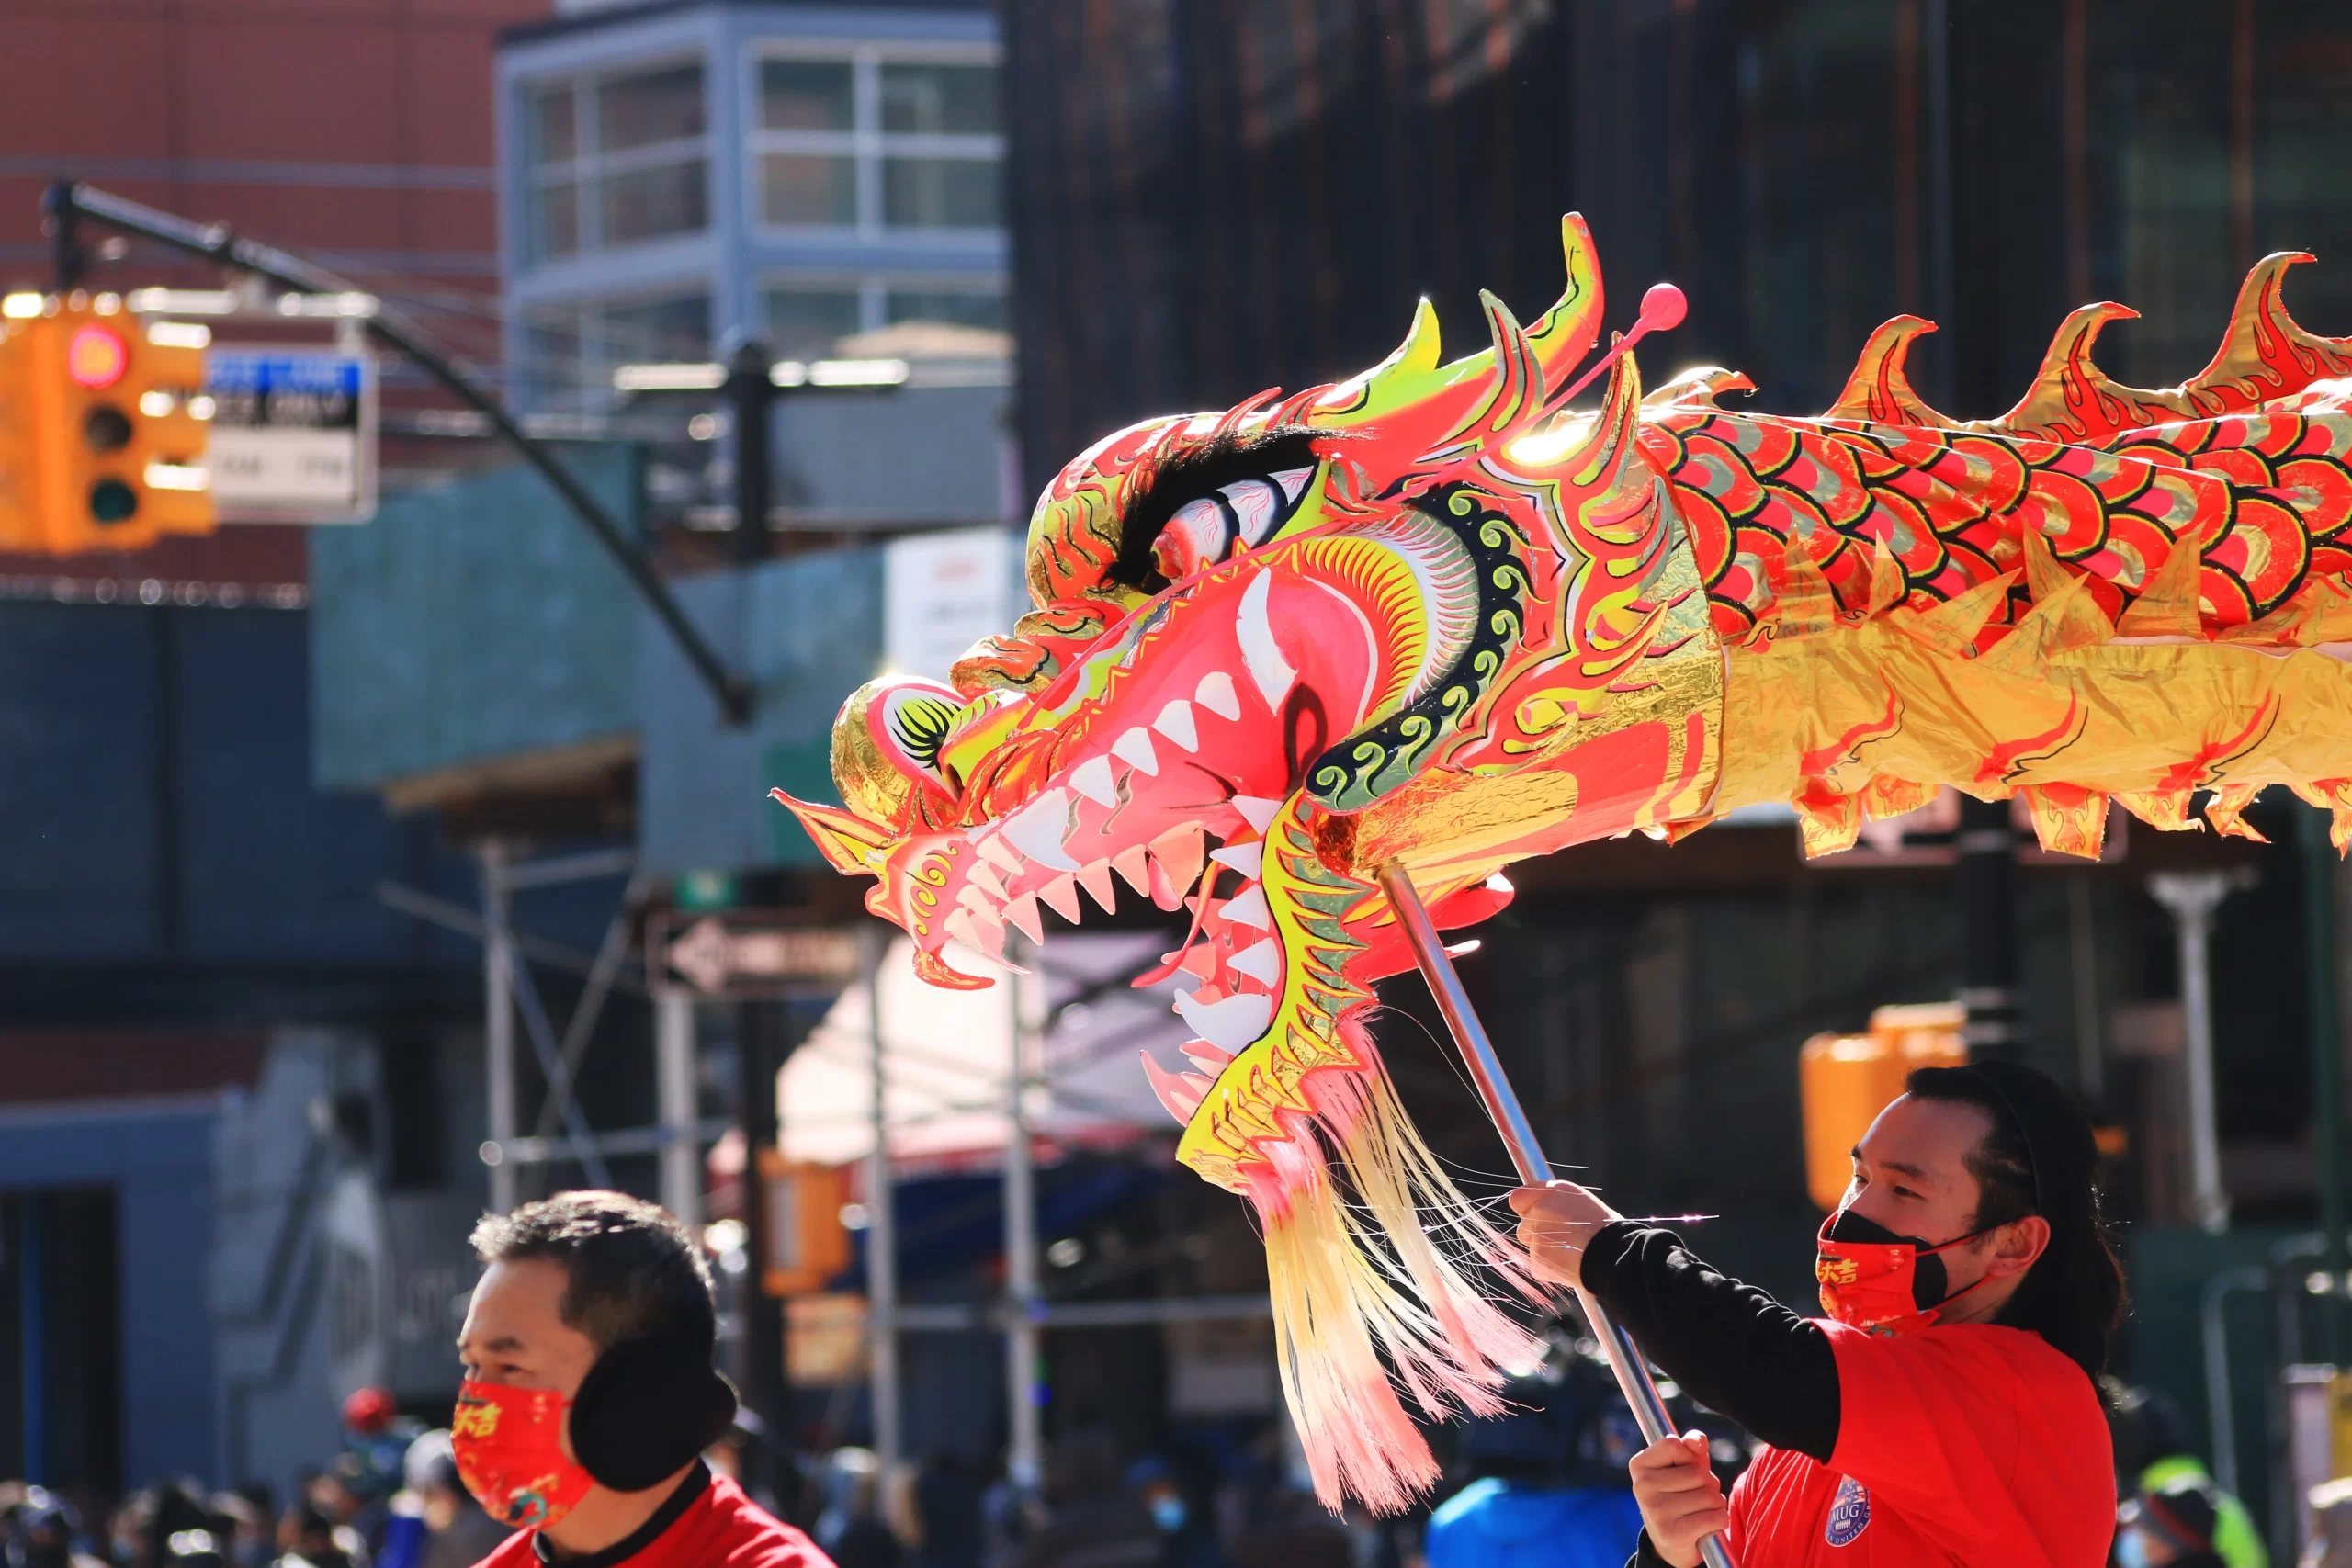 Flushing, Queens, NY, USA Published on February 5, 2022 Free to use under the Unsplash License Residents in Flushing, Queens NY celebrating Lunar New Year in a parade down on the Main Street on February 5, 2022. As Omicron variant surge fades, the community wishes for a better new year.